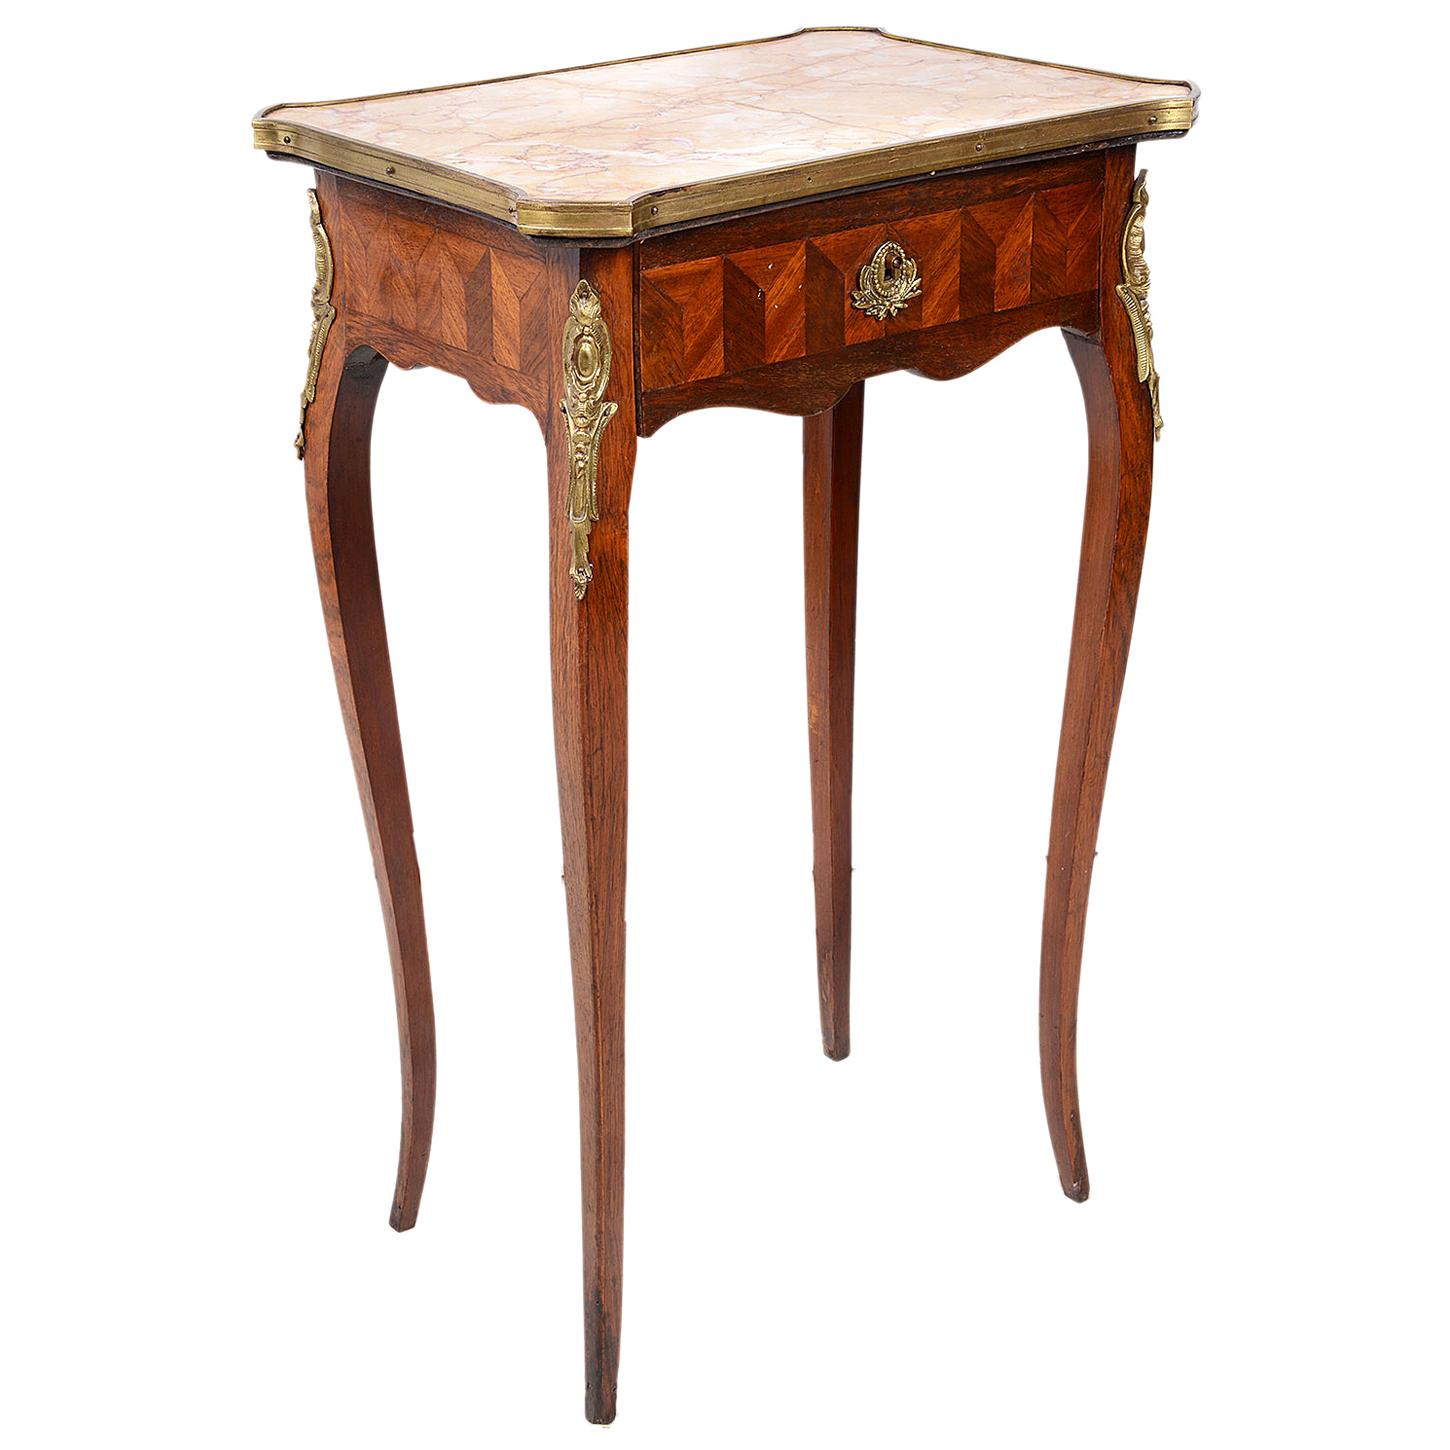 Louis XVI Style Parquetry Inlaid Side Table, 19th Century